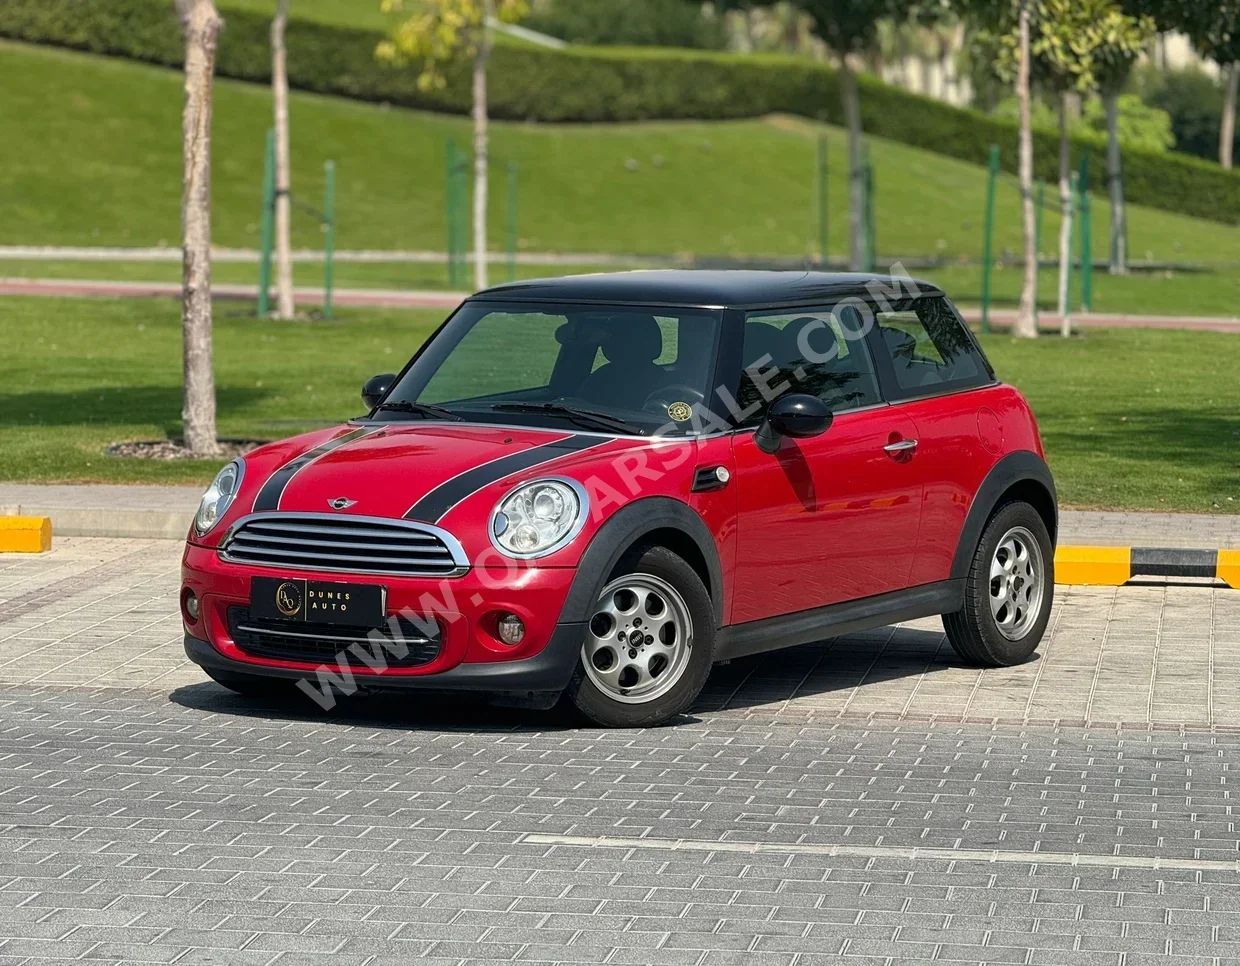 Mini  Cooper  2013  Automatic  111,900 Km  3 Cylinder  Front Wheel Drive (FWD)  Hatchback  Red